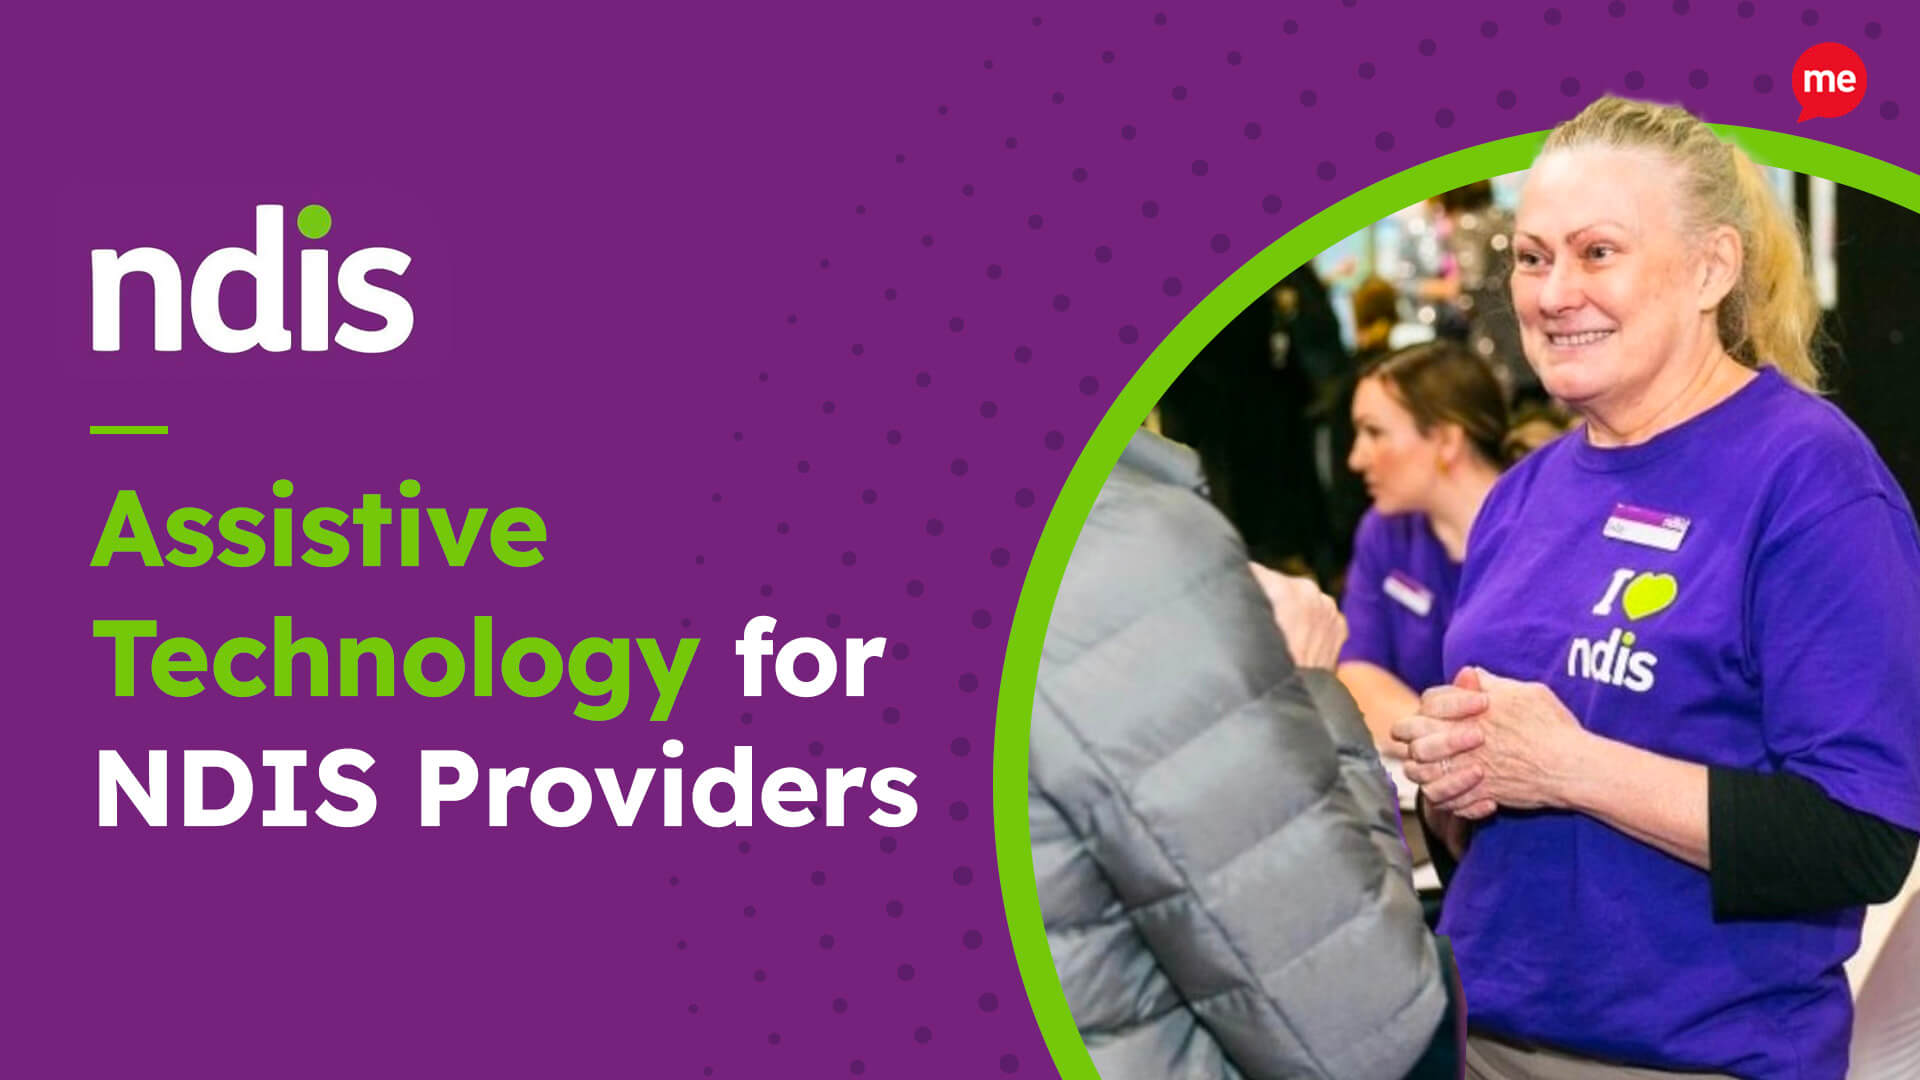 Assistive Technology for NDIS Providers